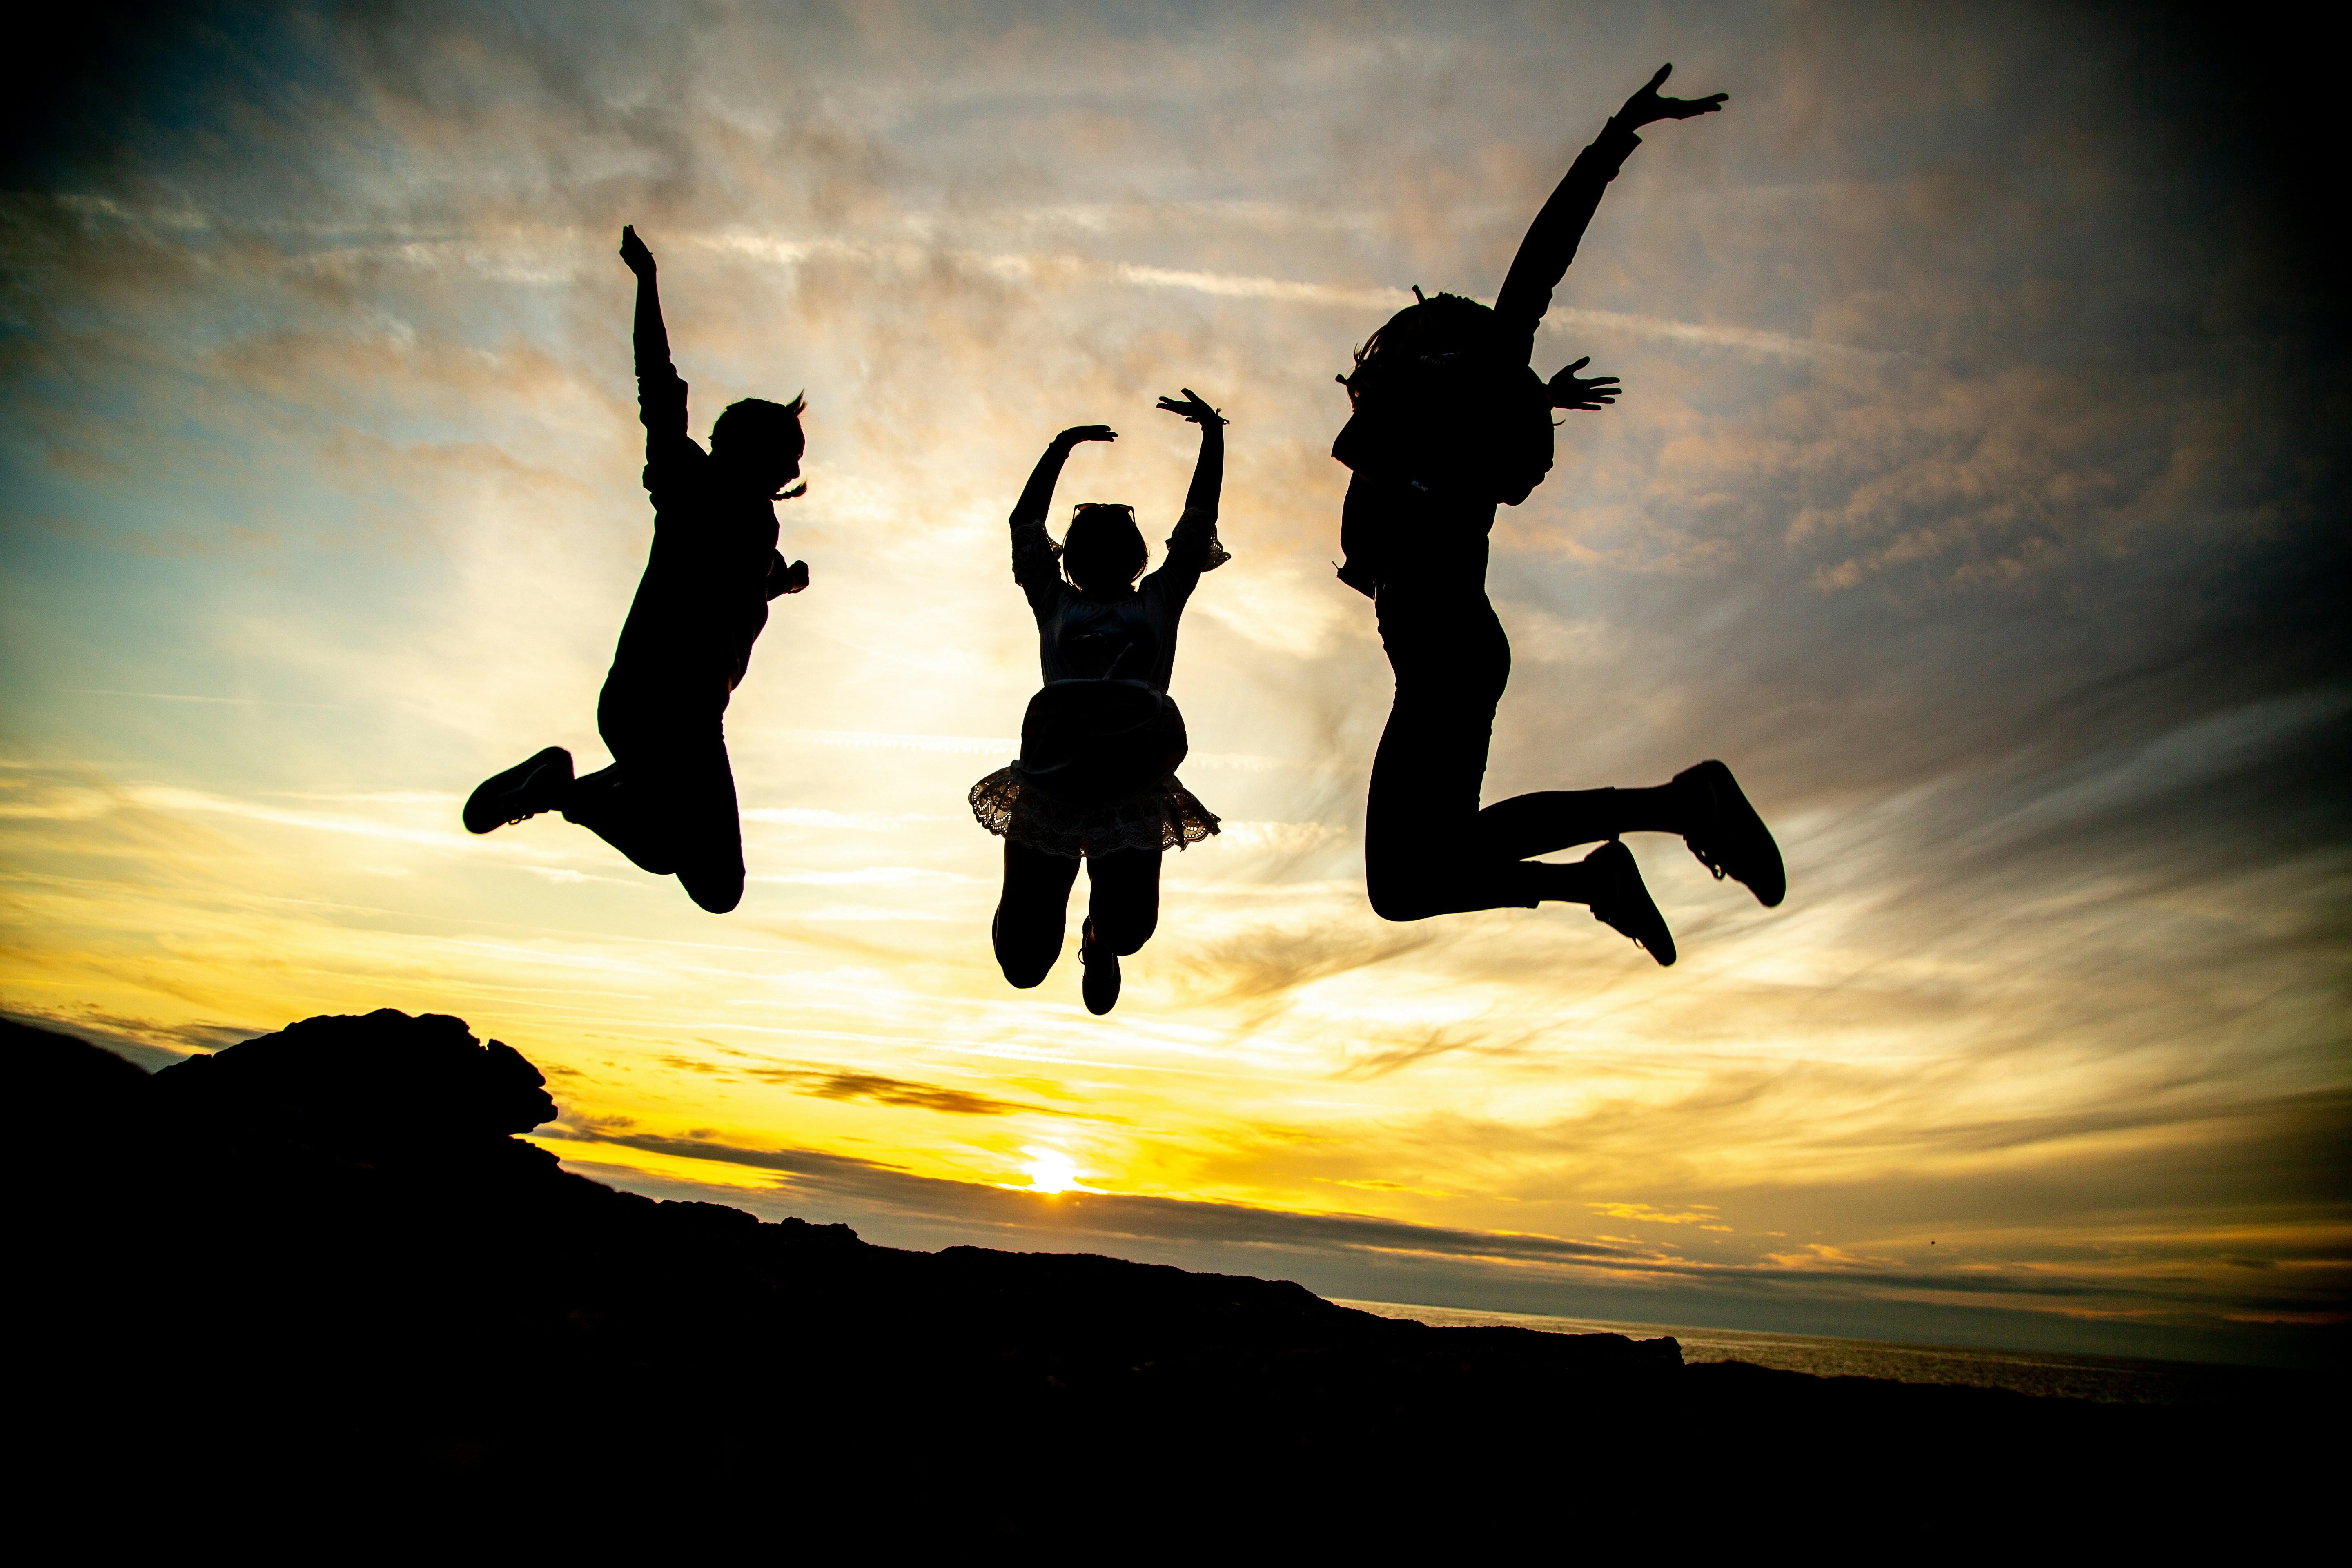 Silhouettes of three children jumping in the air against a backdrop of a sunset